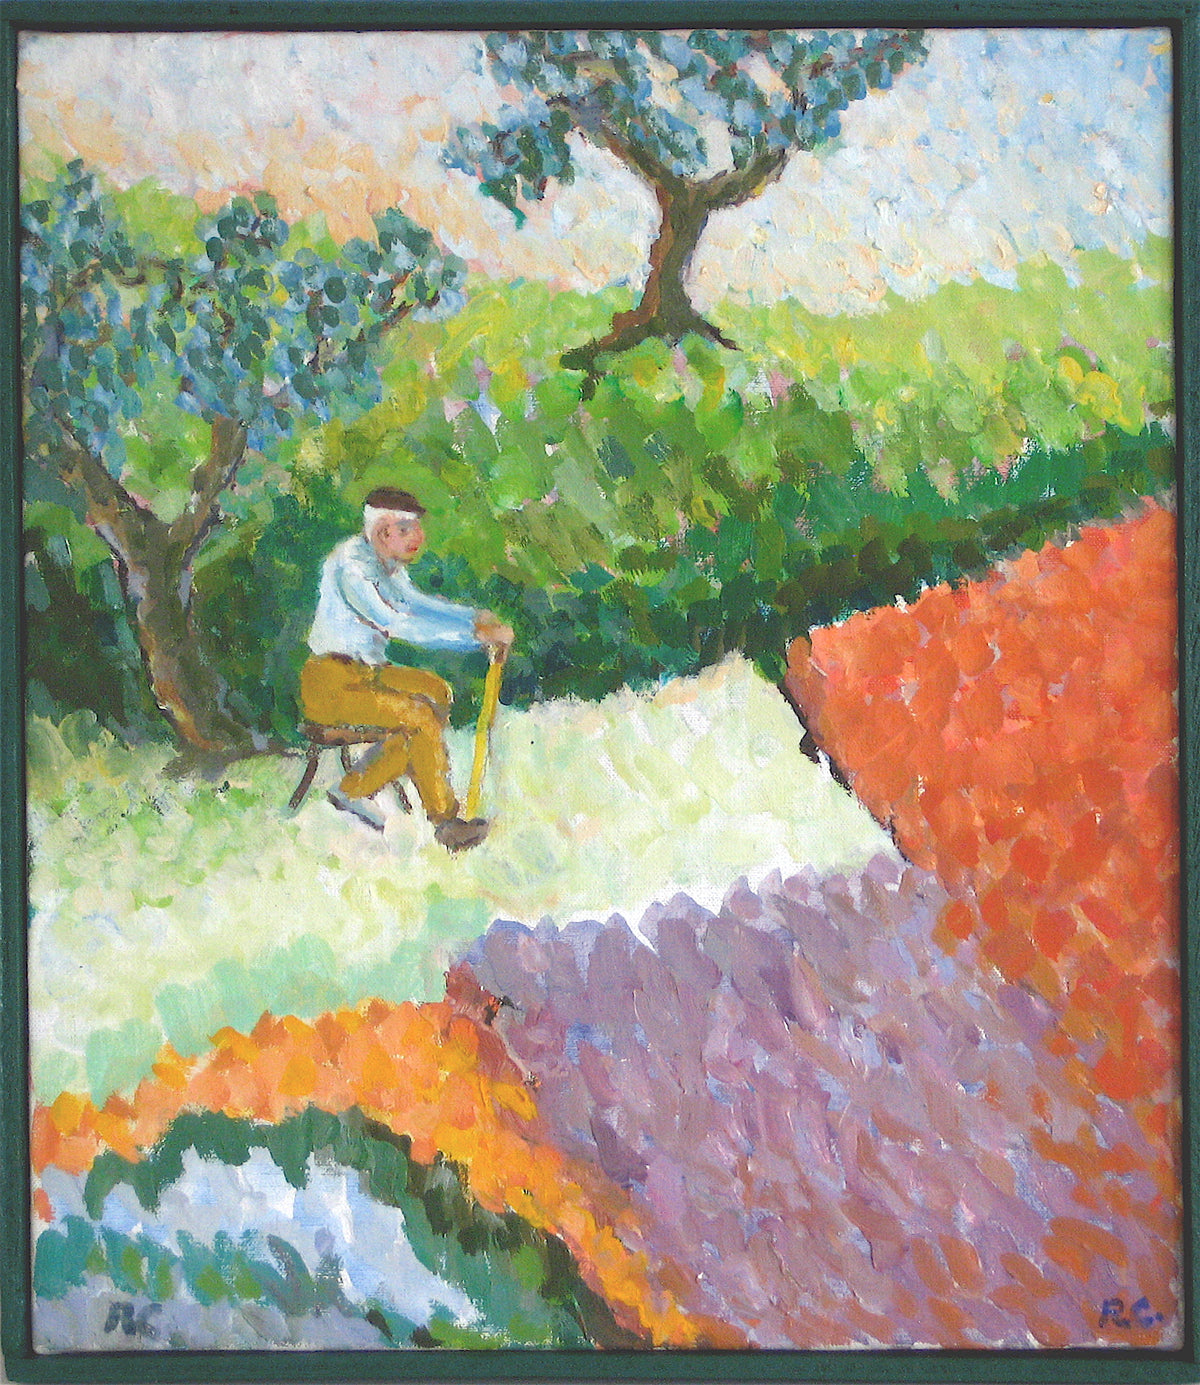 &lt;i&gt;Portugal, Old Man Contemplating His Garden &lt;/i&gt;&lt;br&gt;2003 Oil&lt;br&gt;&lt;br&gt;#9708